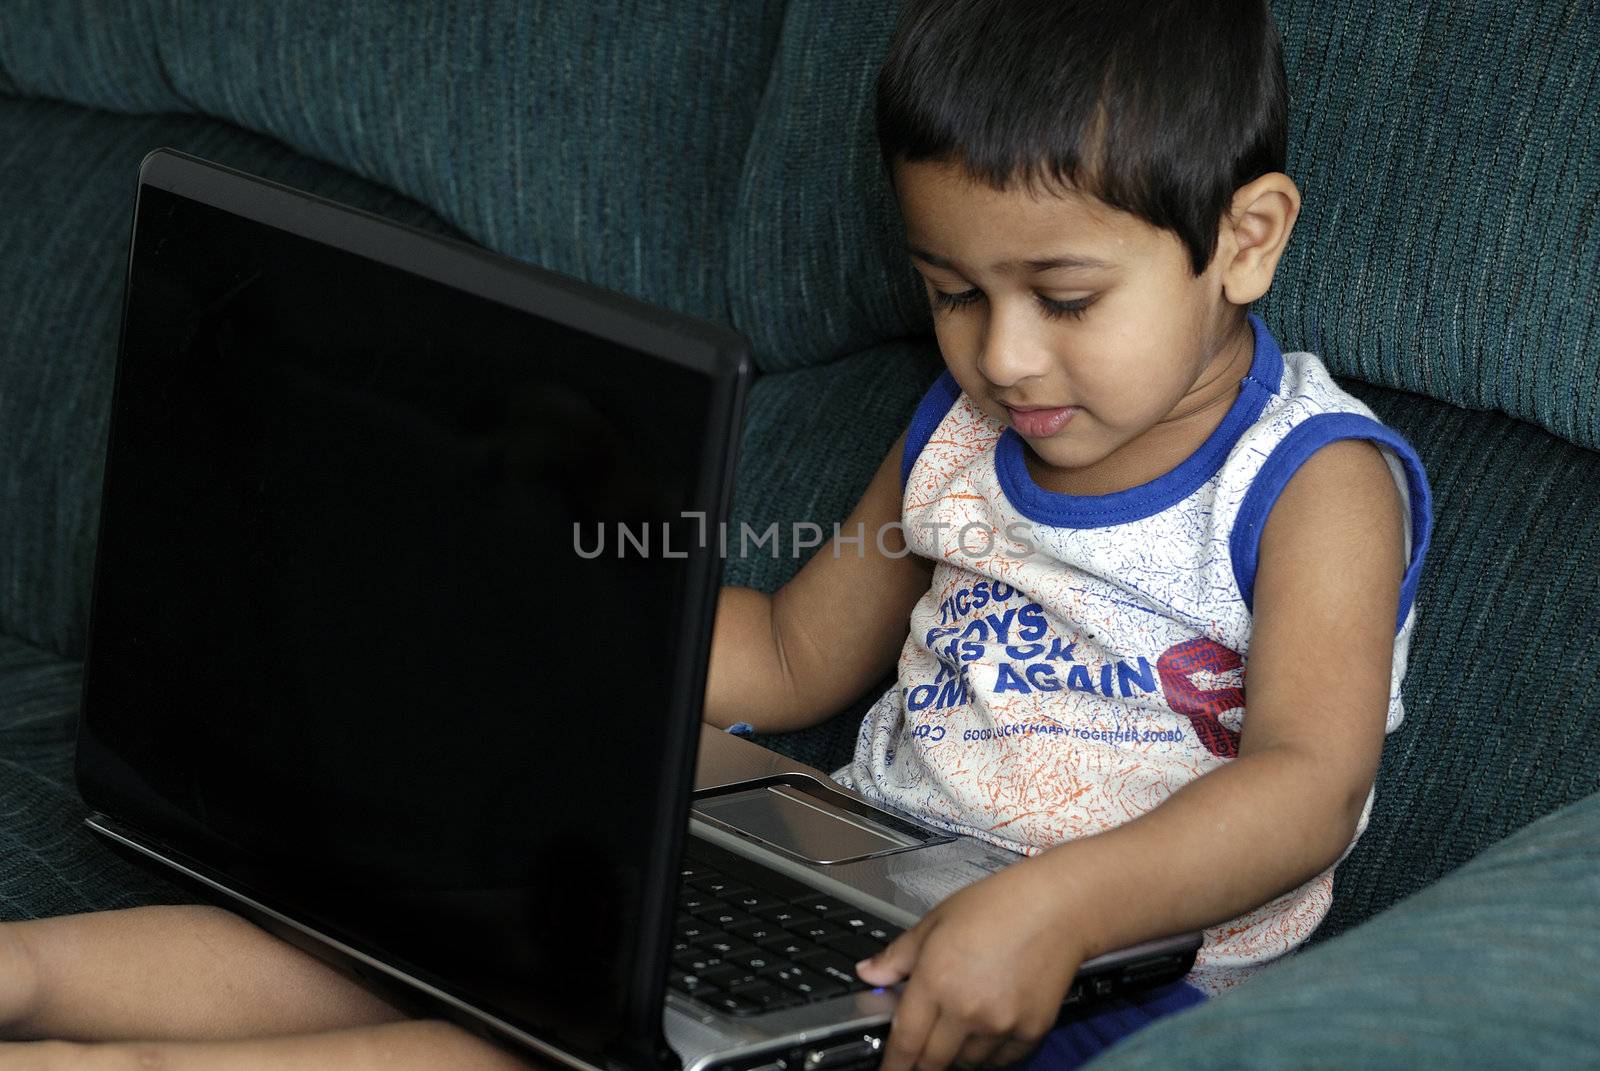 Handsome Indian kid learning using his laptop